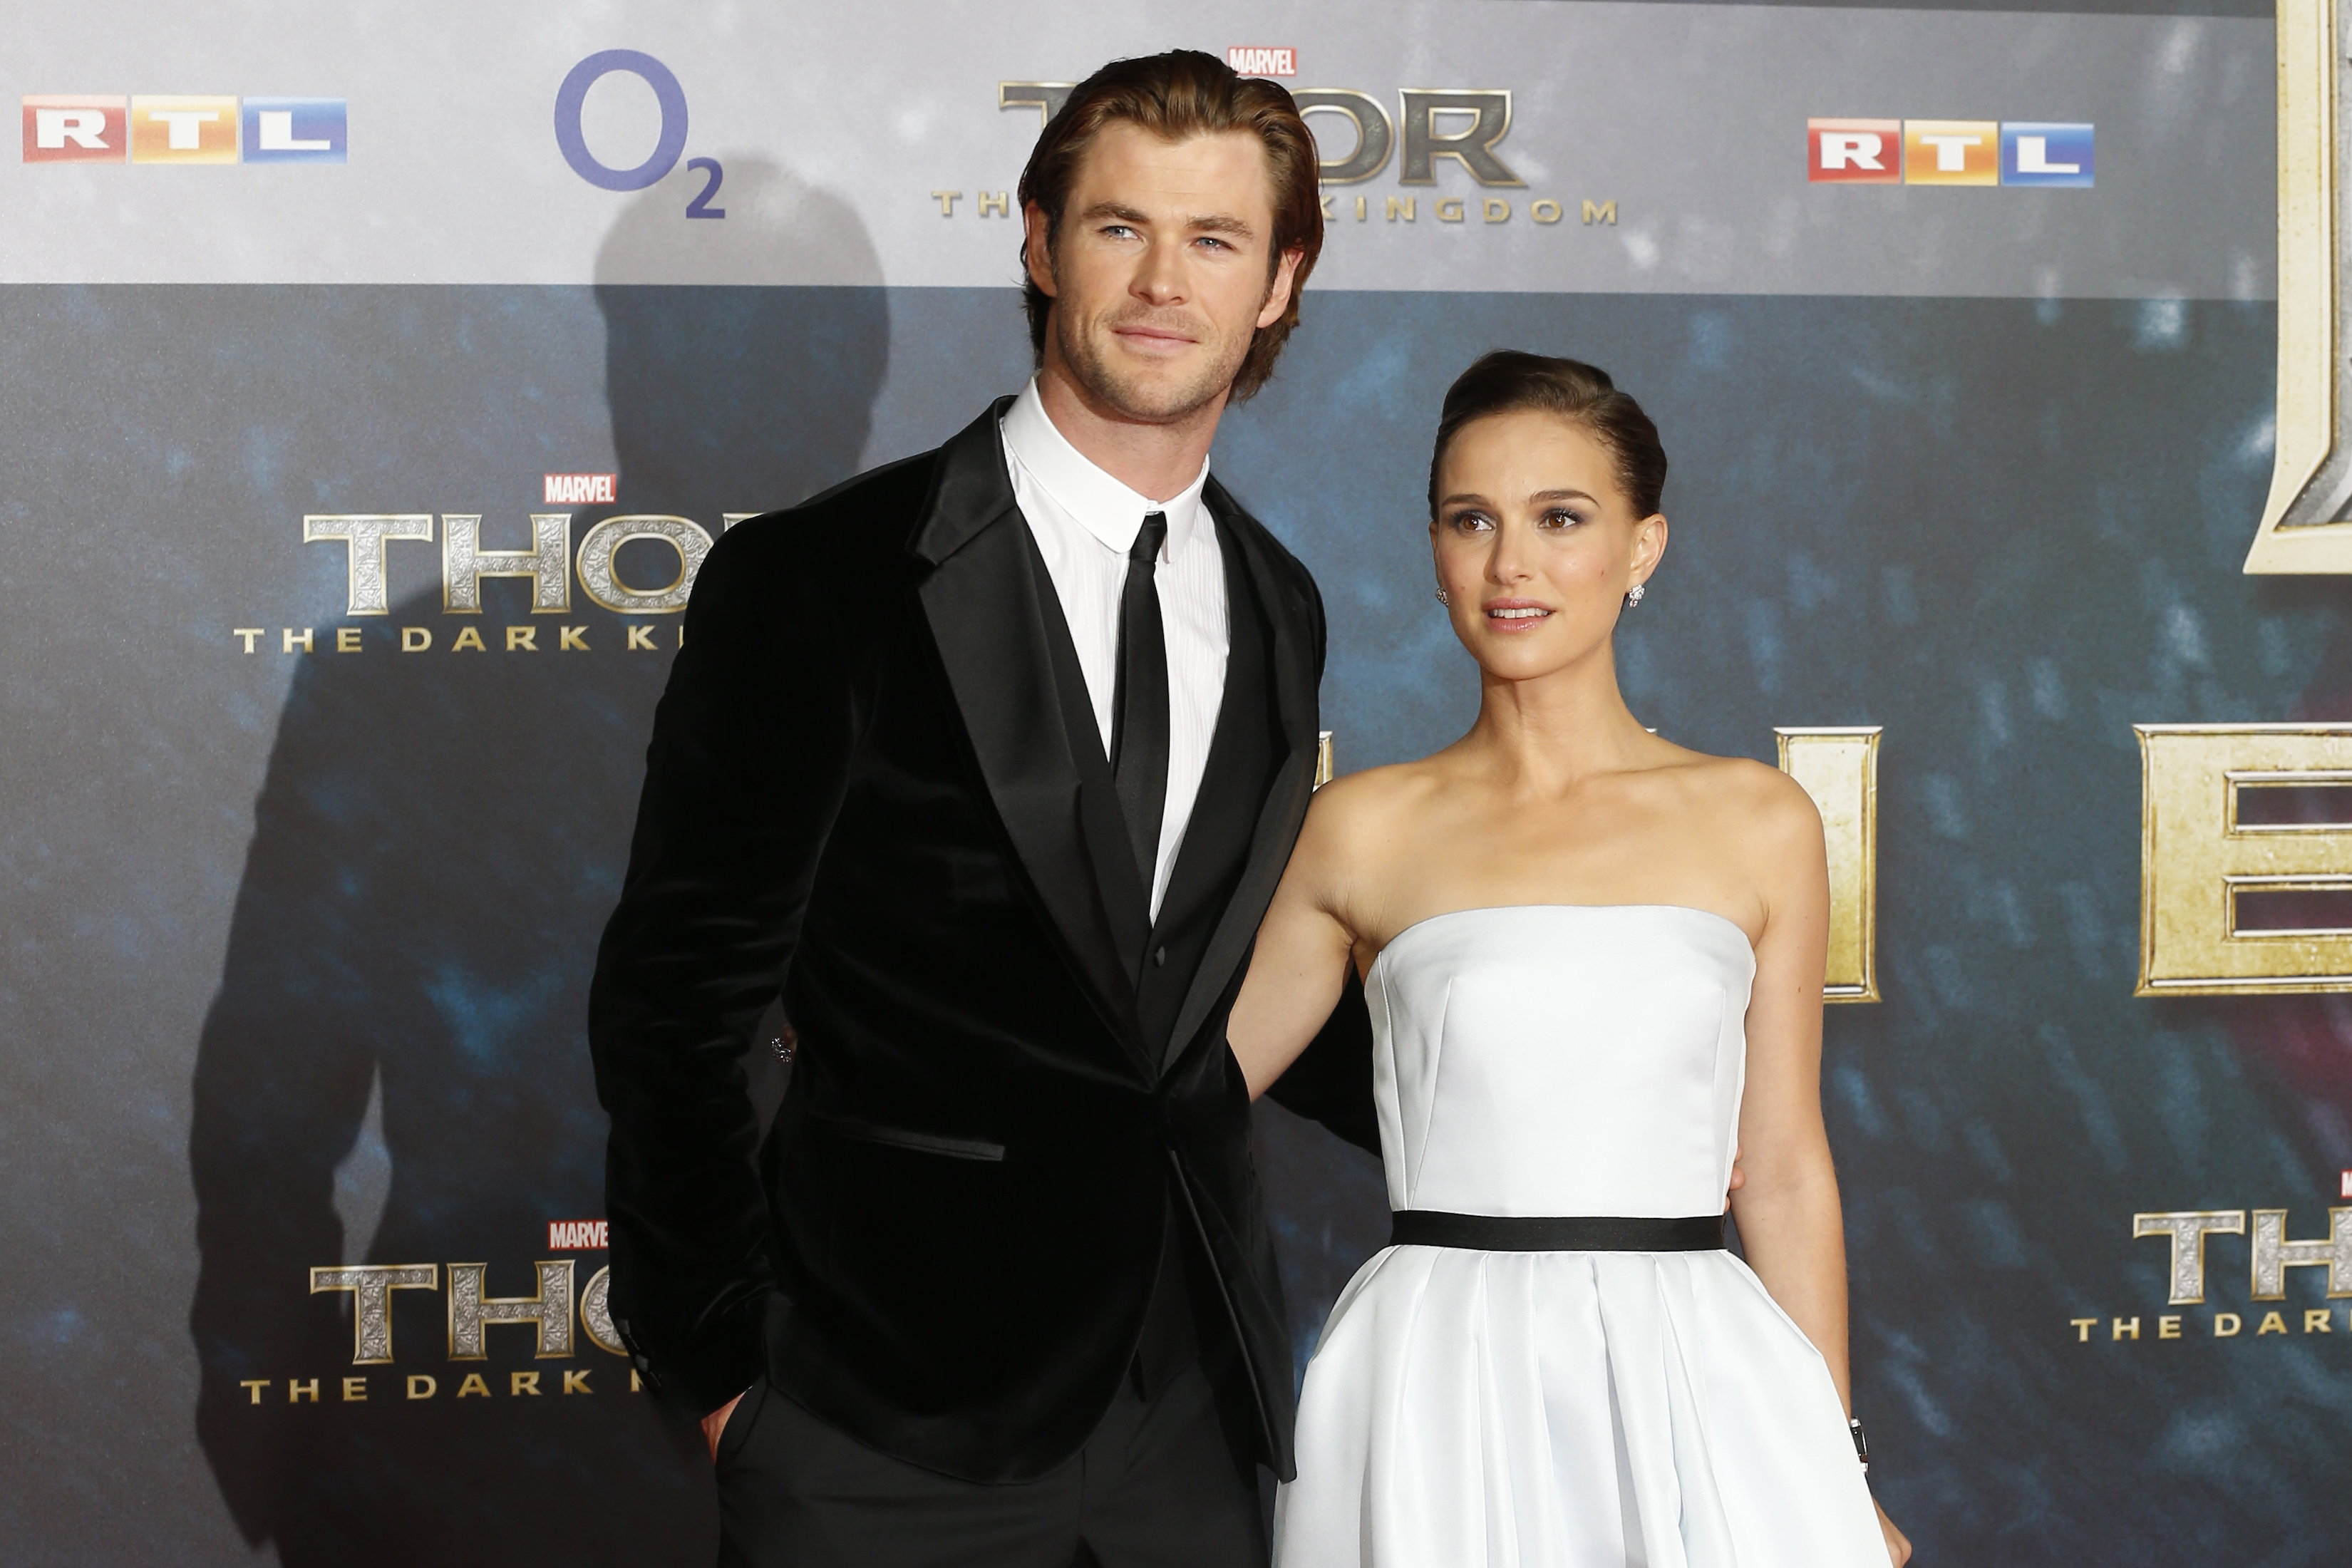 Cast members of Thor 4 Love and Thunder Chris Hemsworth and Natalie Portman smiling for cameras at a Thor premiere